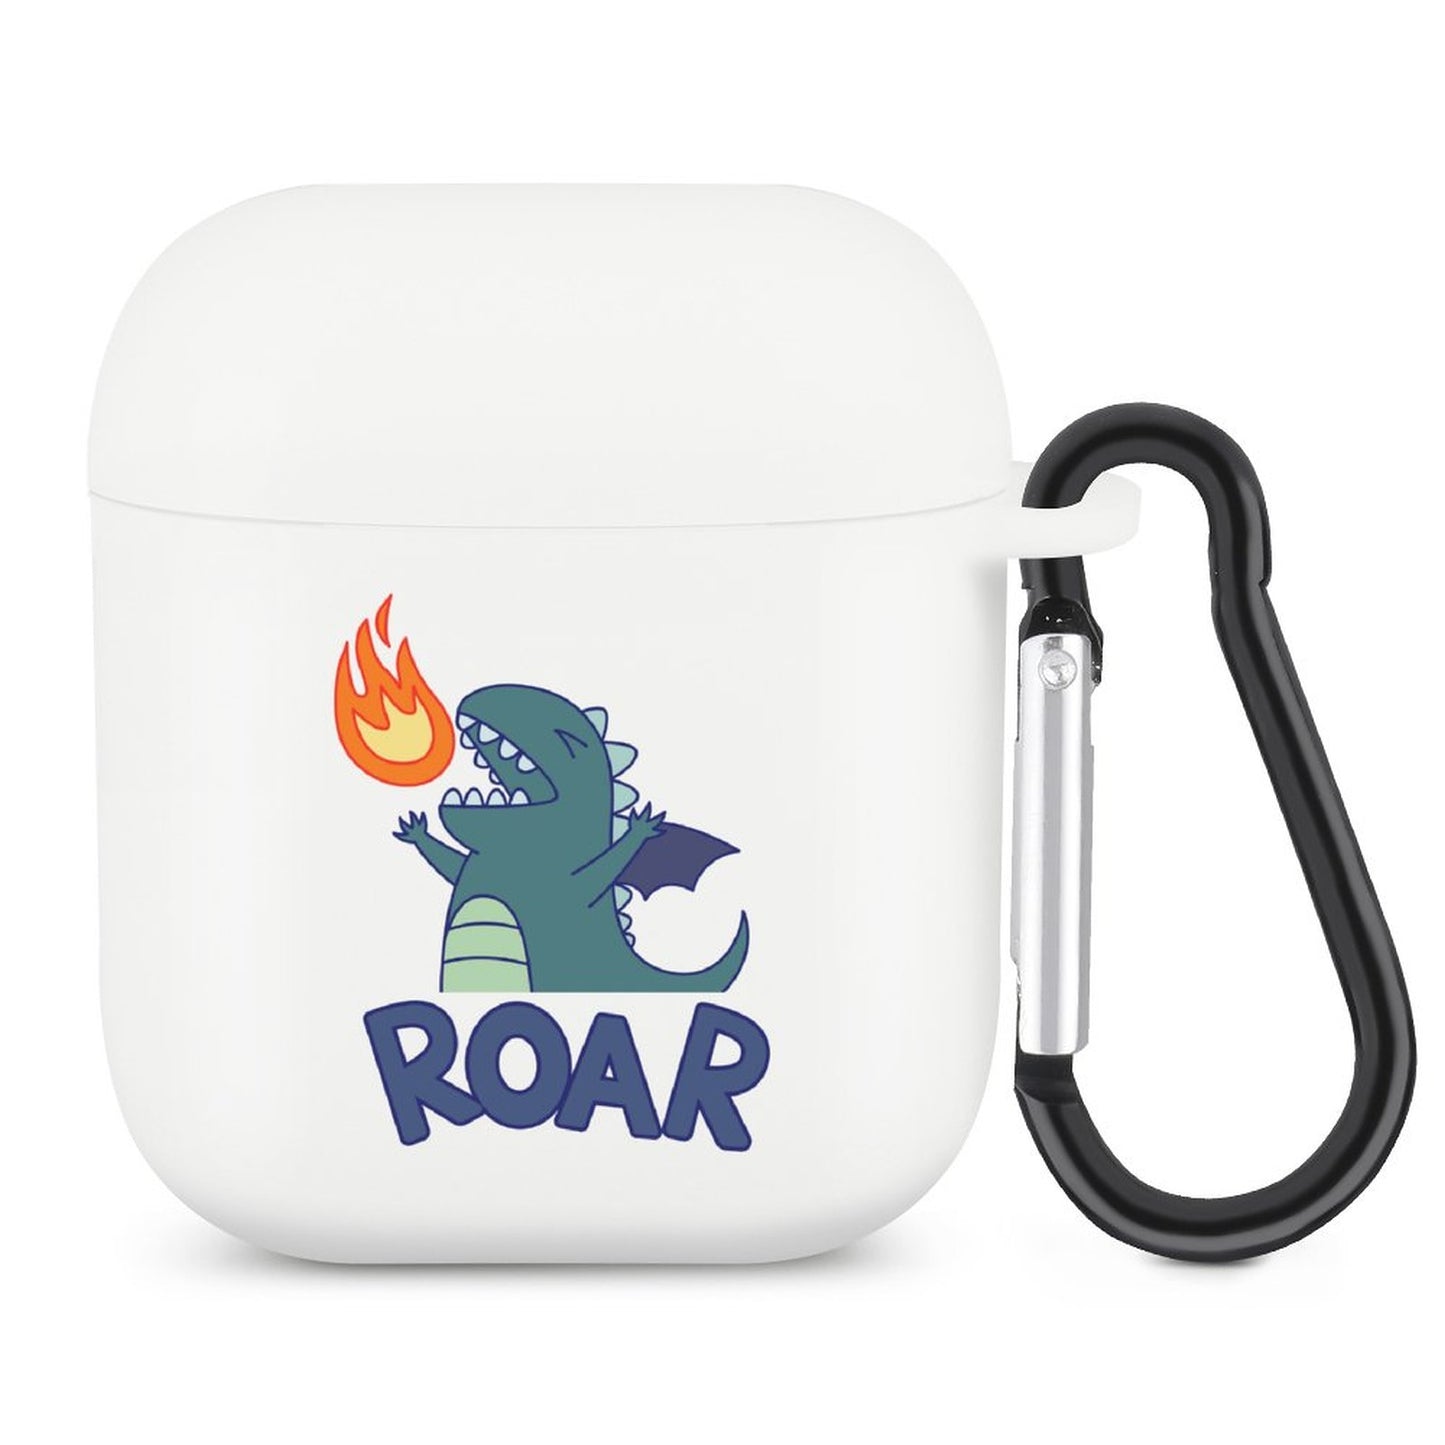 Online Customize Earbuds Case Cover for AirPods Fire Breathing Little Monster Roar